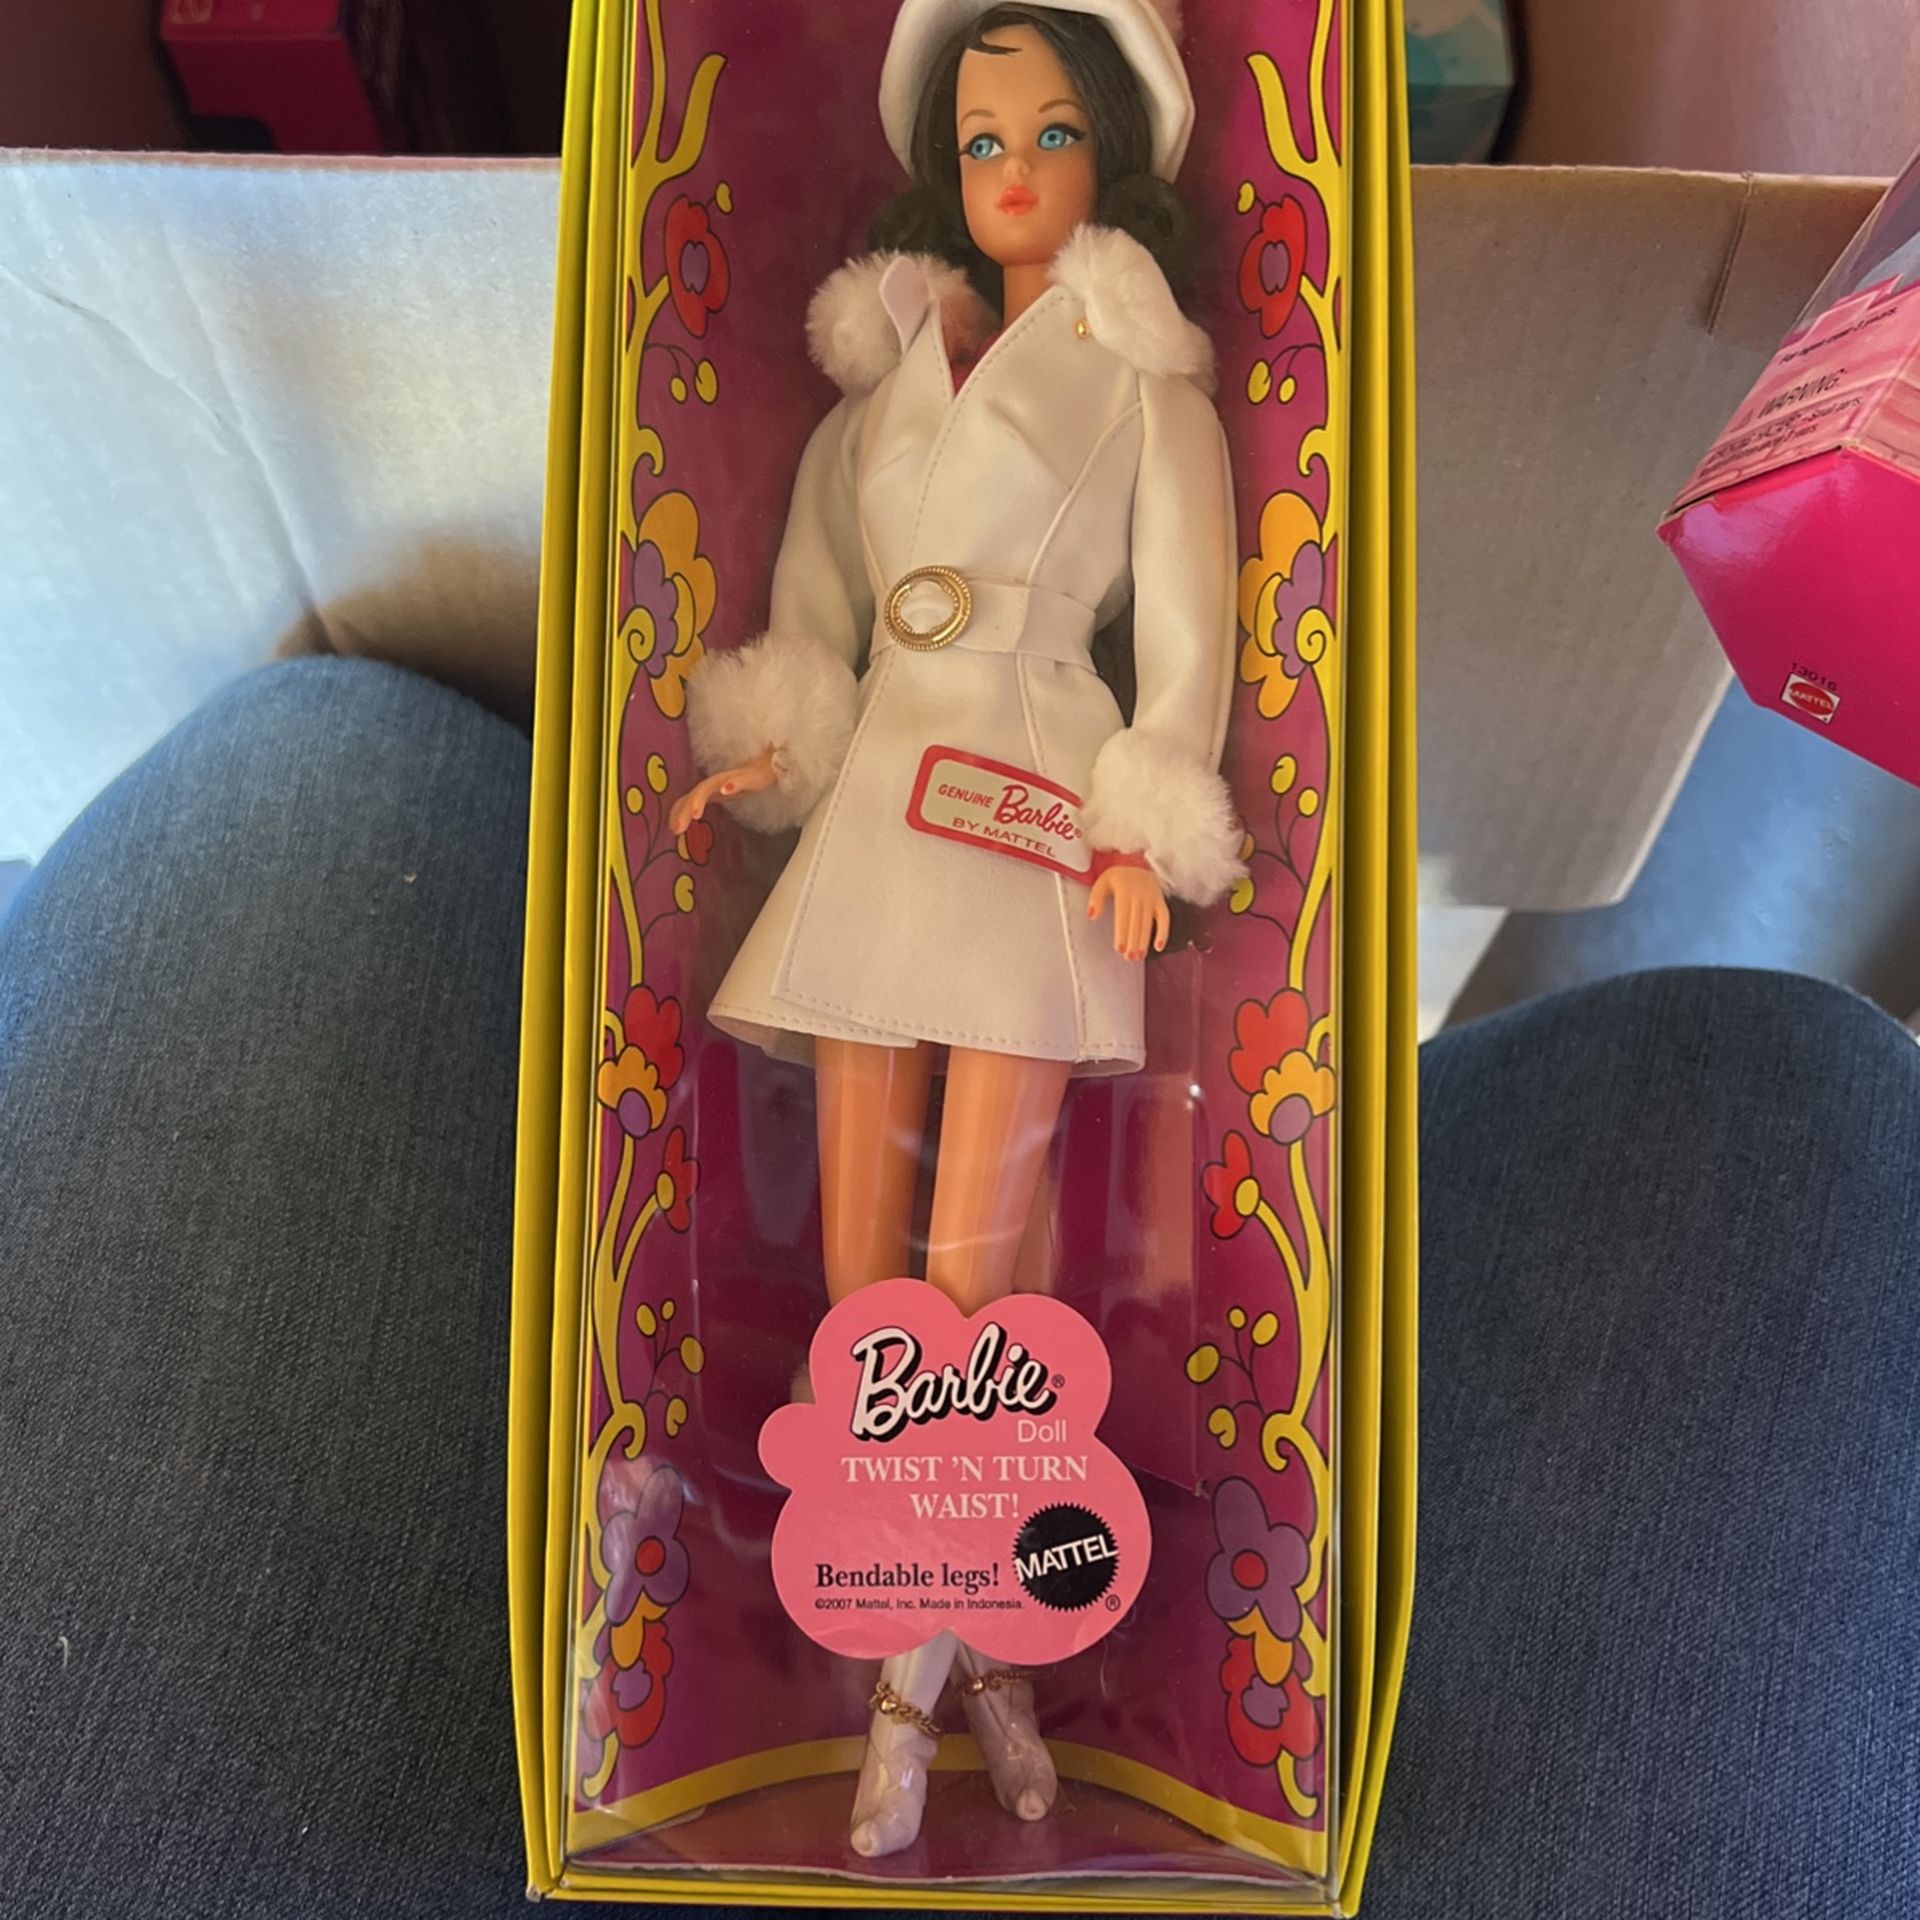 Mattel 2007 Red, White And Warm Twist 'N Turn Barbie Doll Reproduction